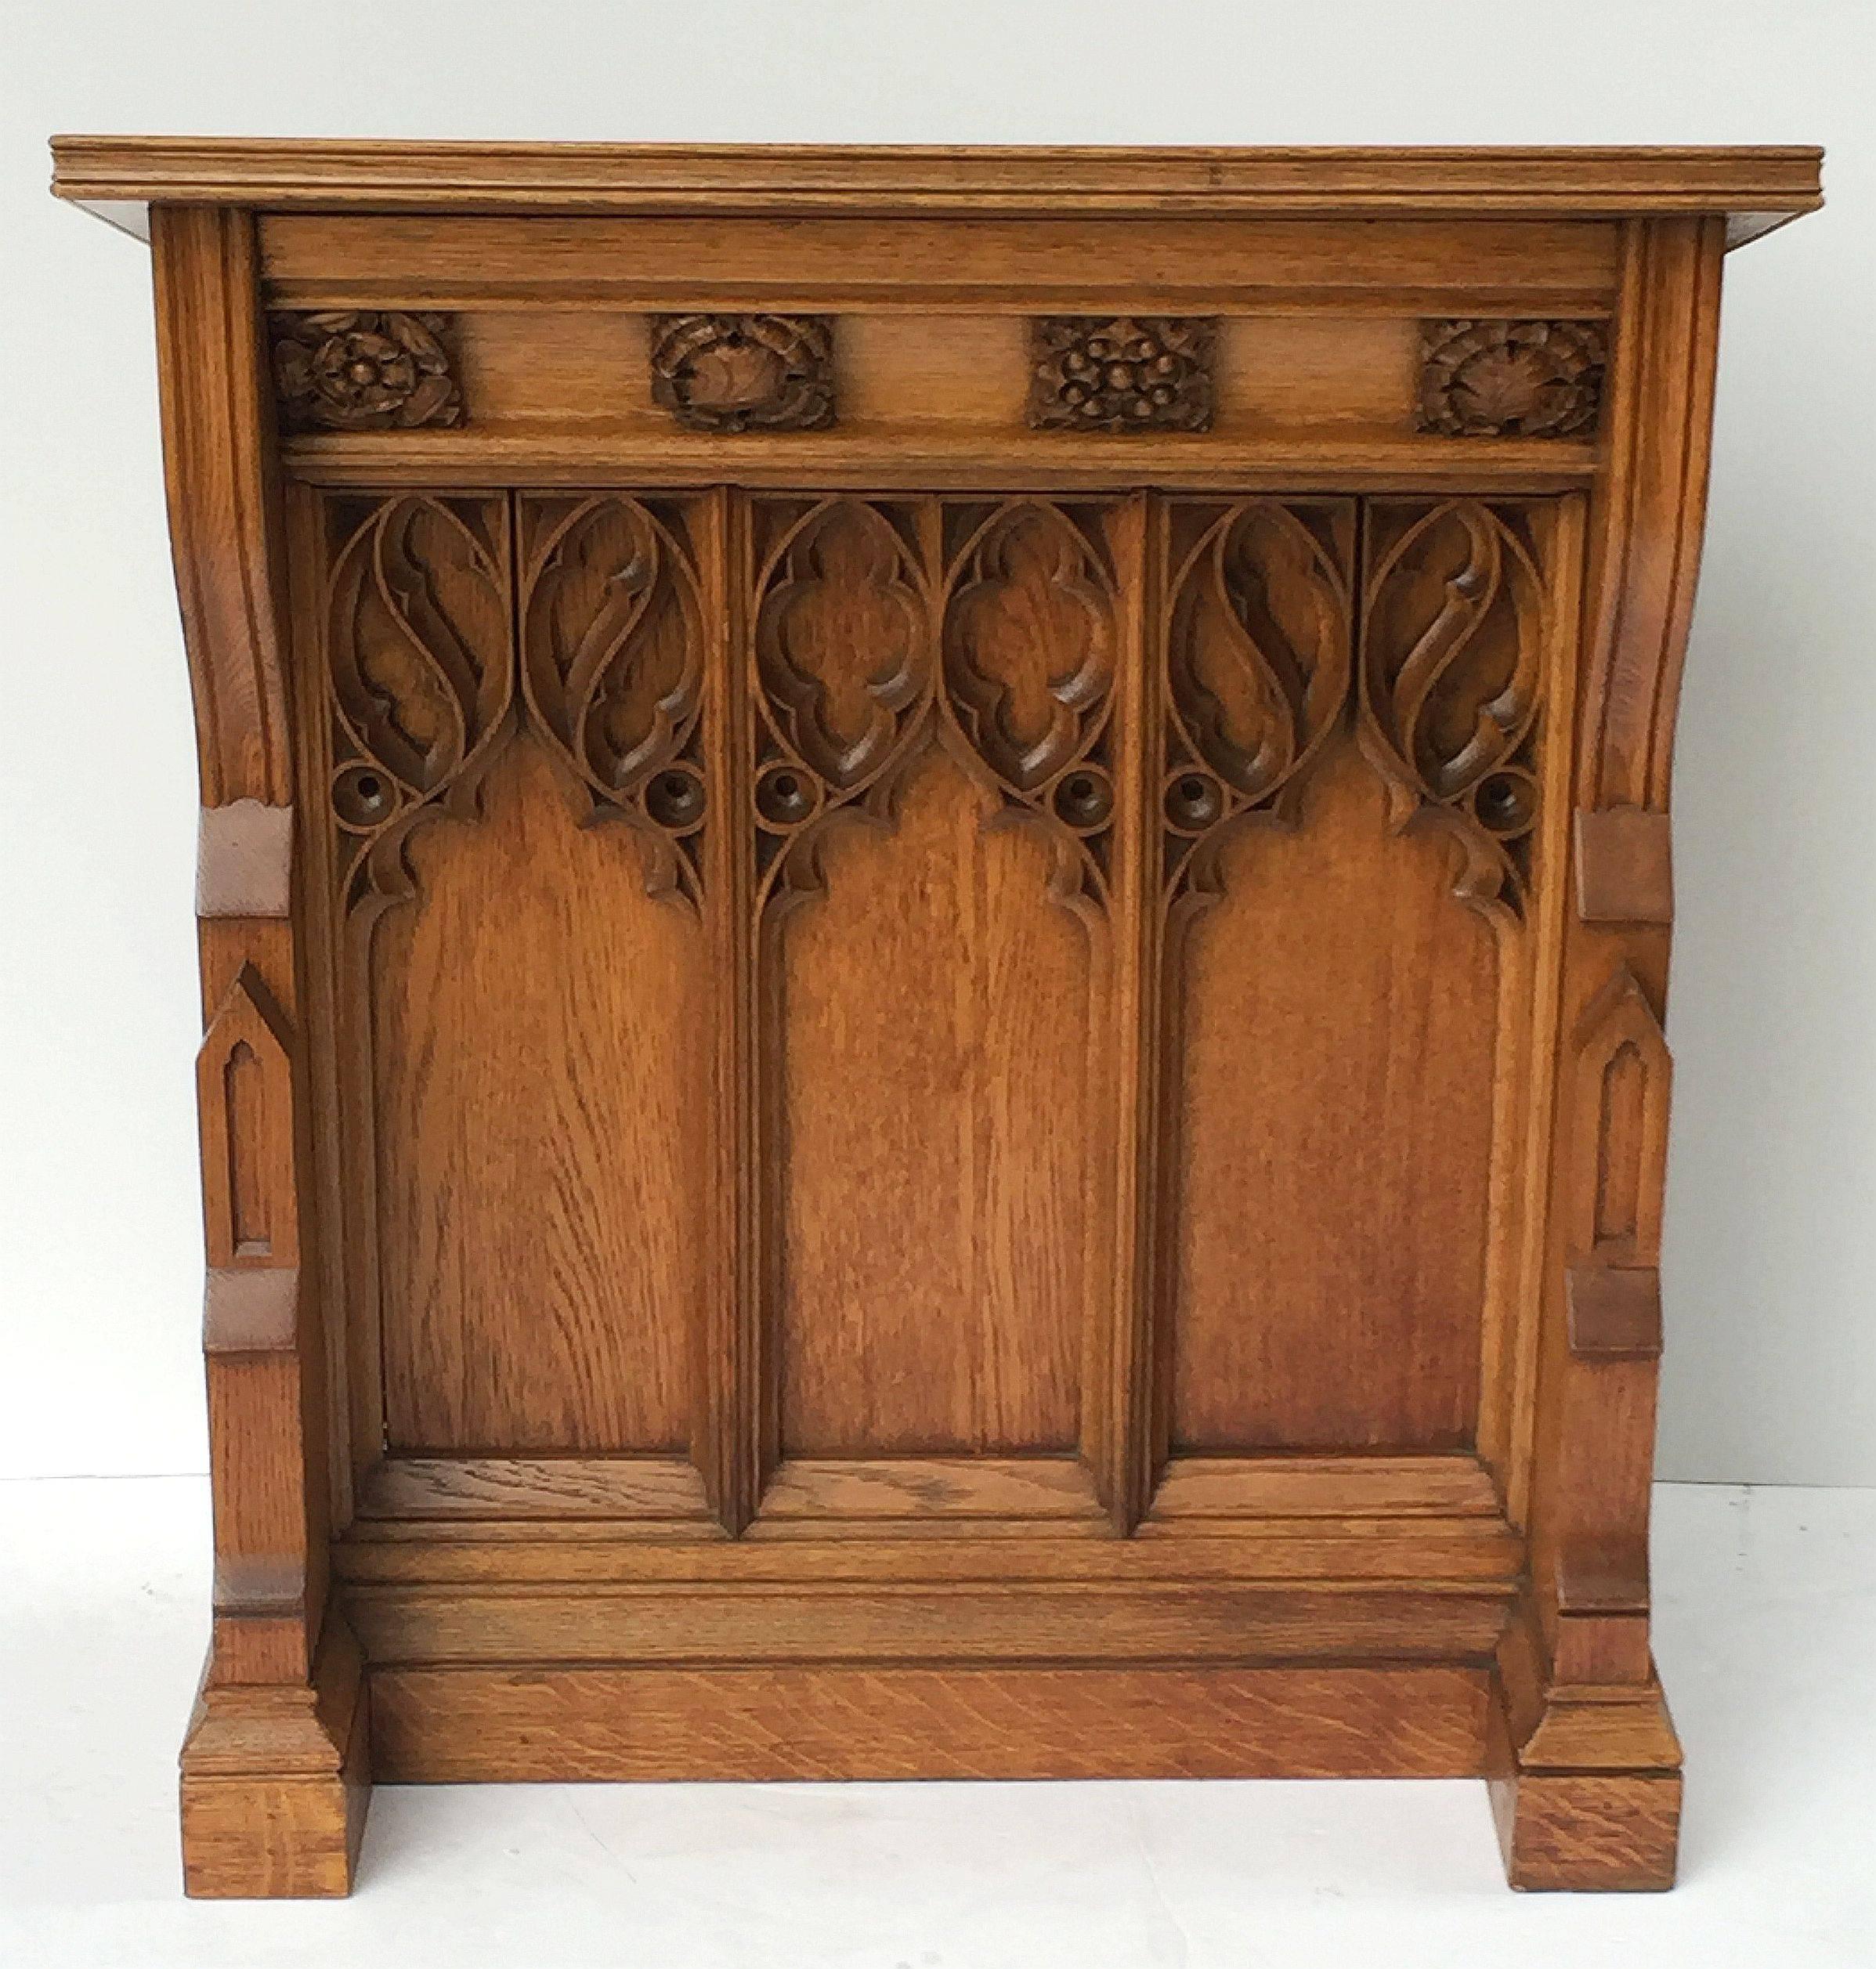 Carved English Ecclesiastical Lectern in the Gothic Style